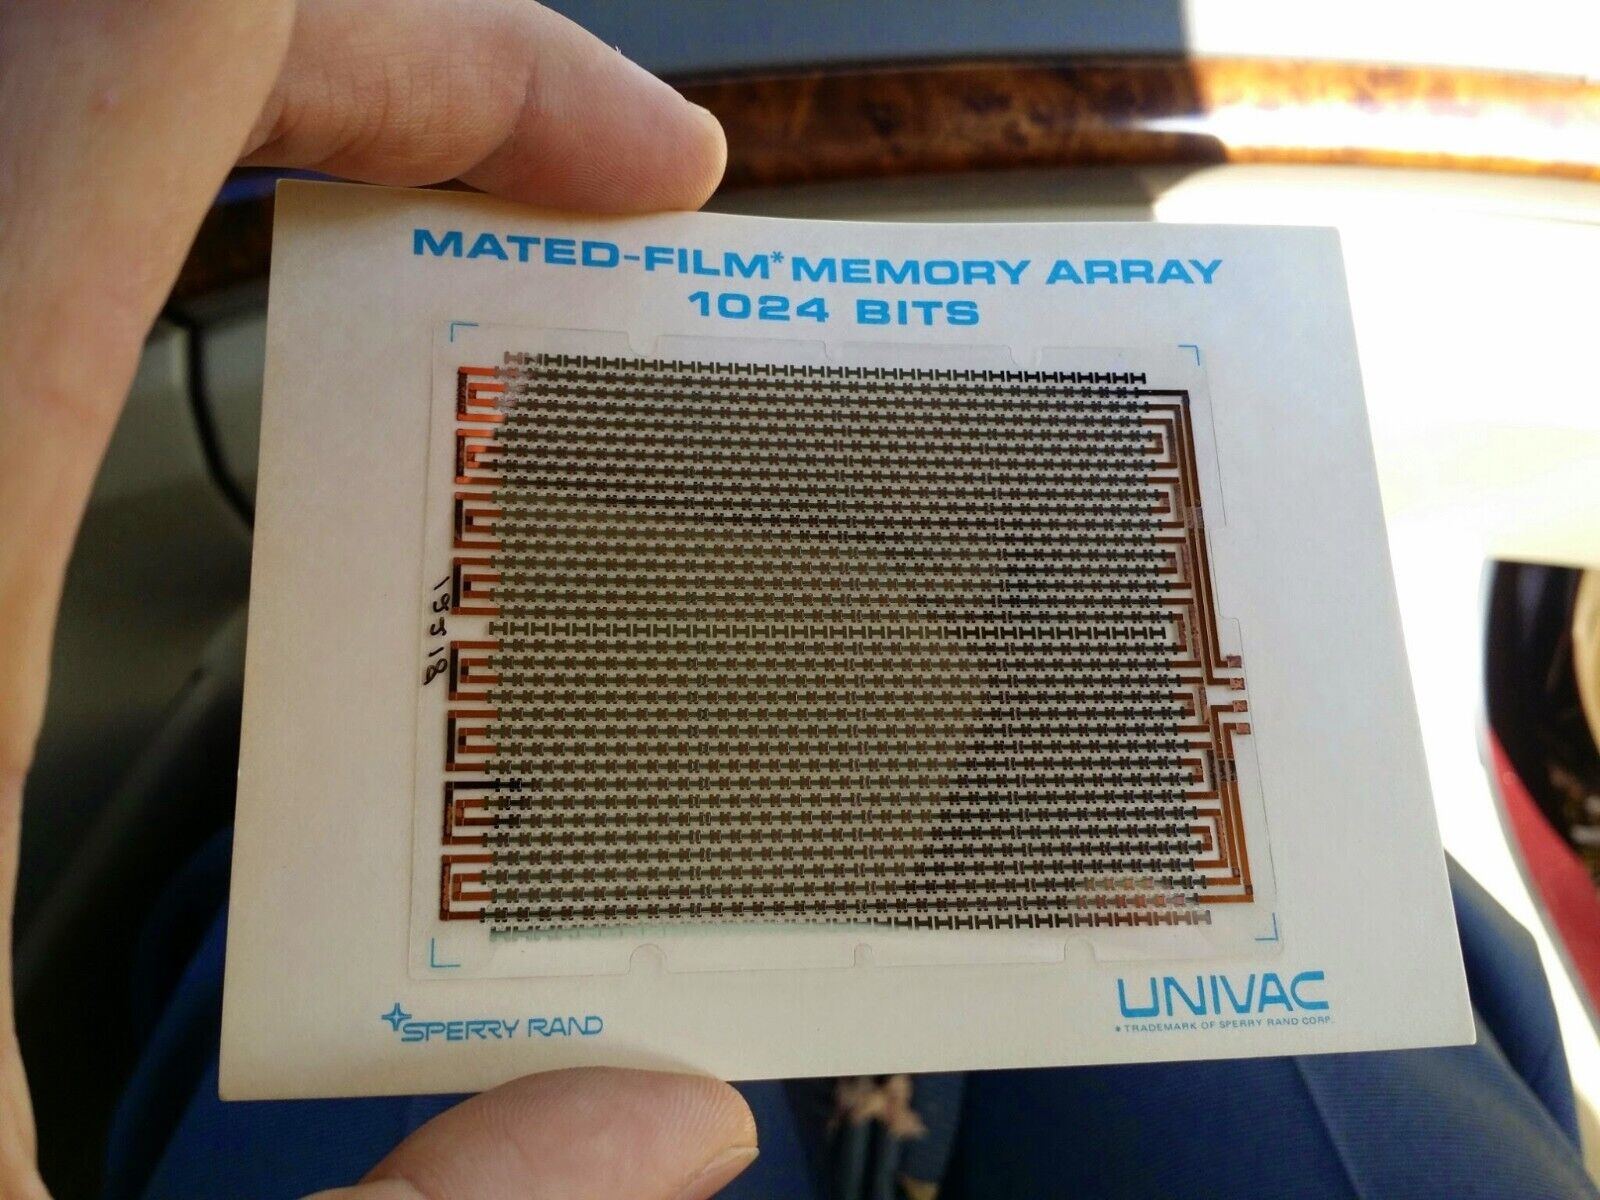 Mated-Film Memory Array 1024 bits Univac Sperry Rand Prototype 1958